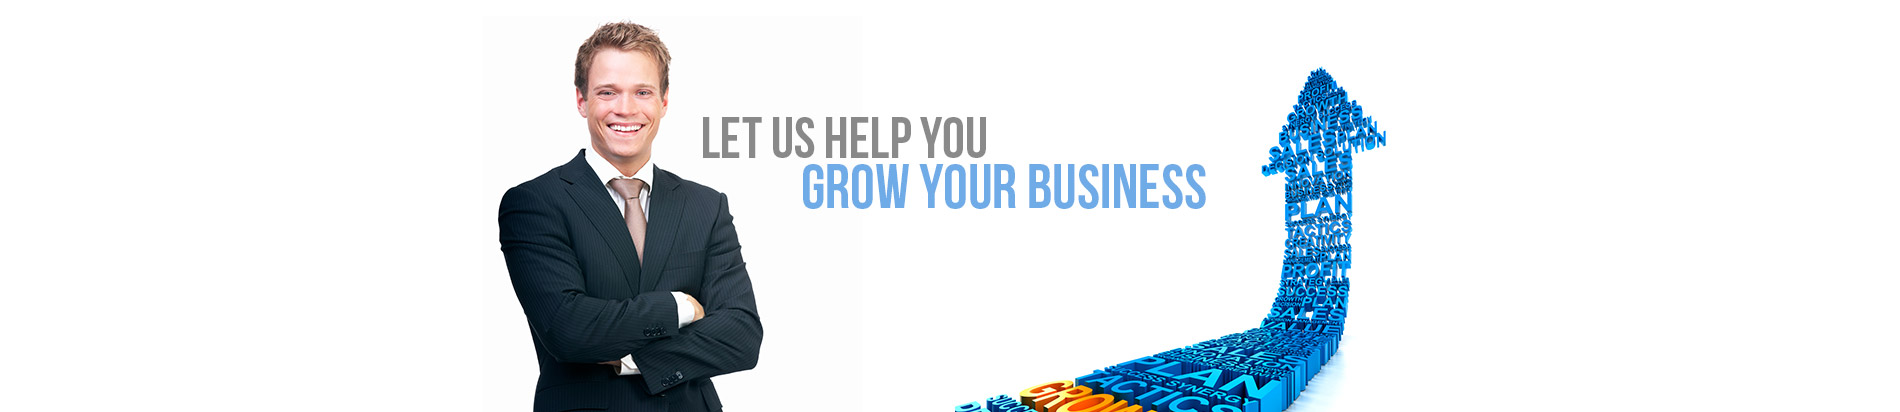 Let us Help you Grow your business